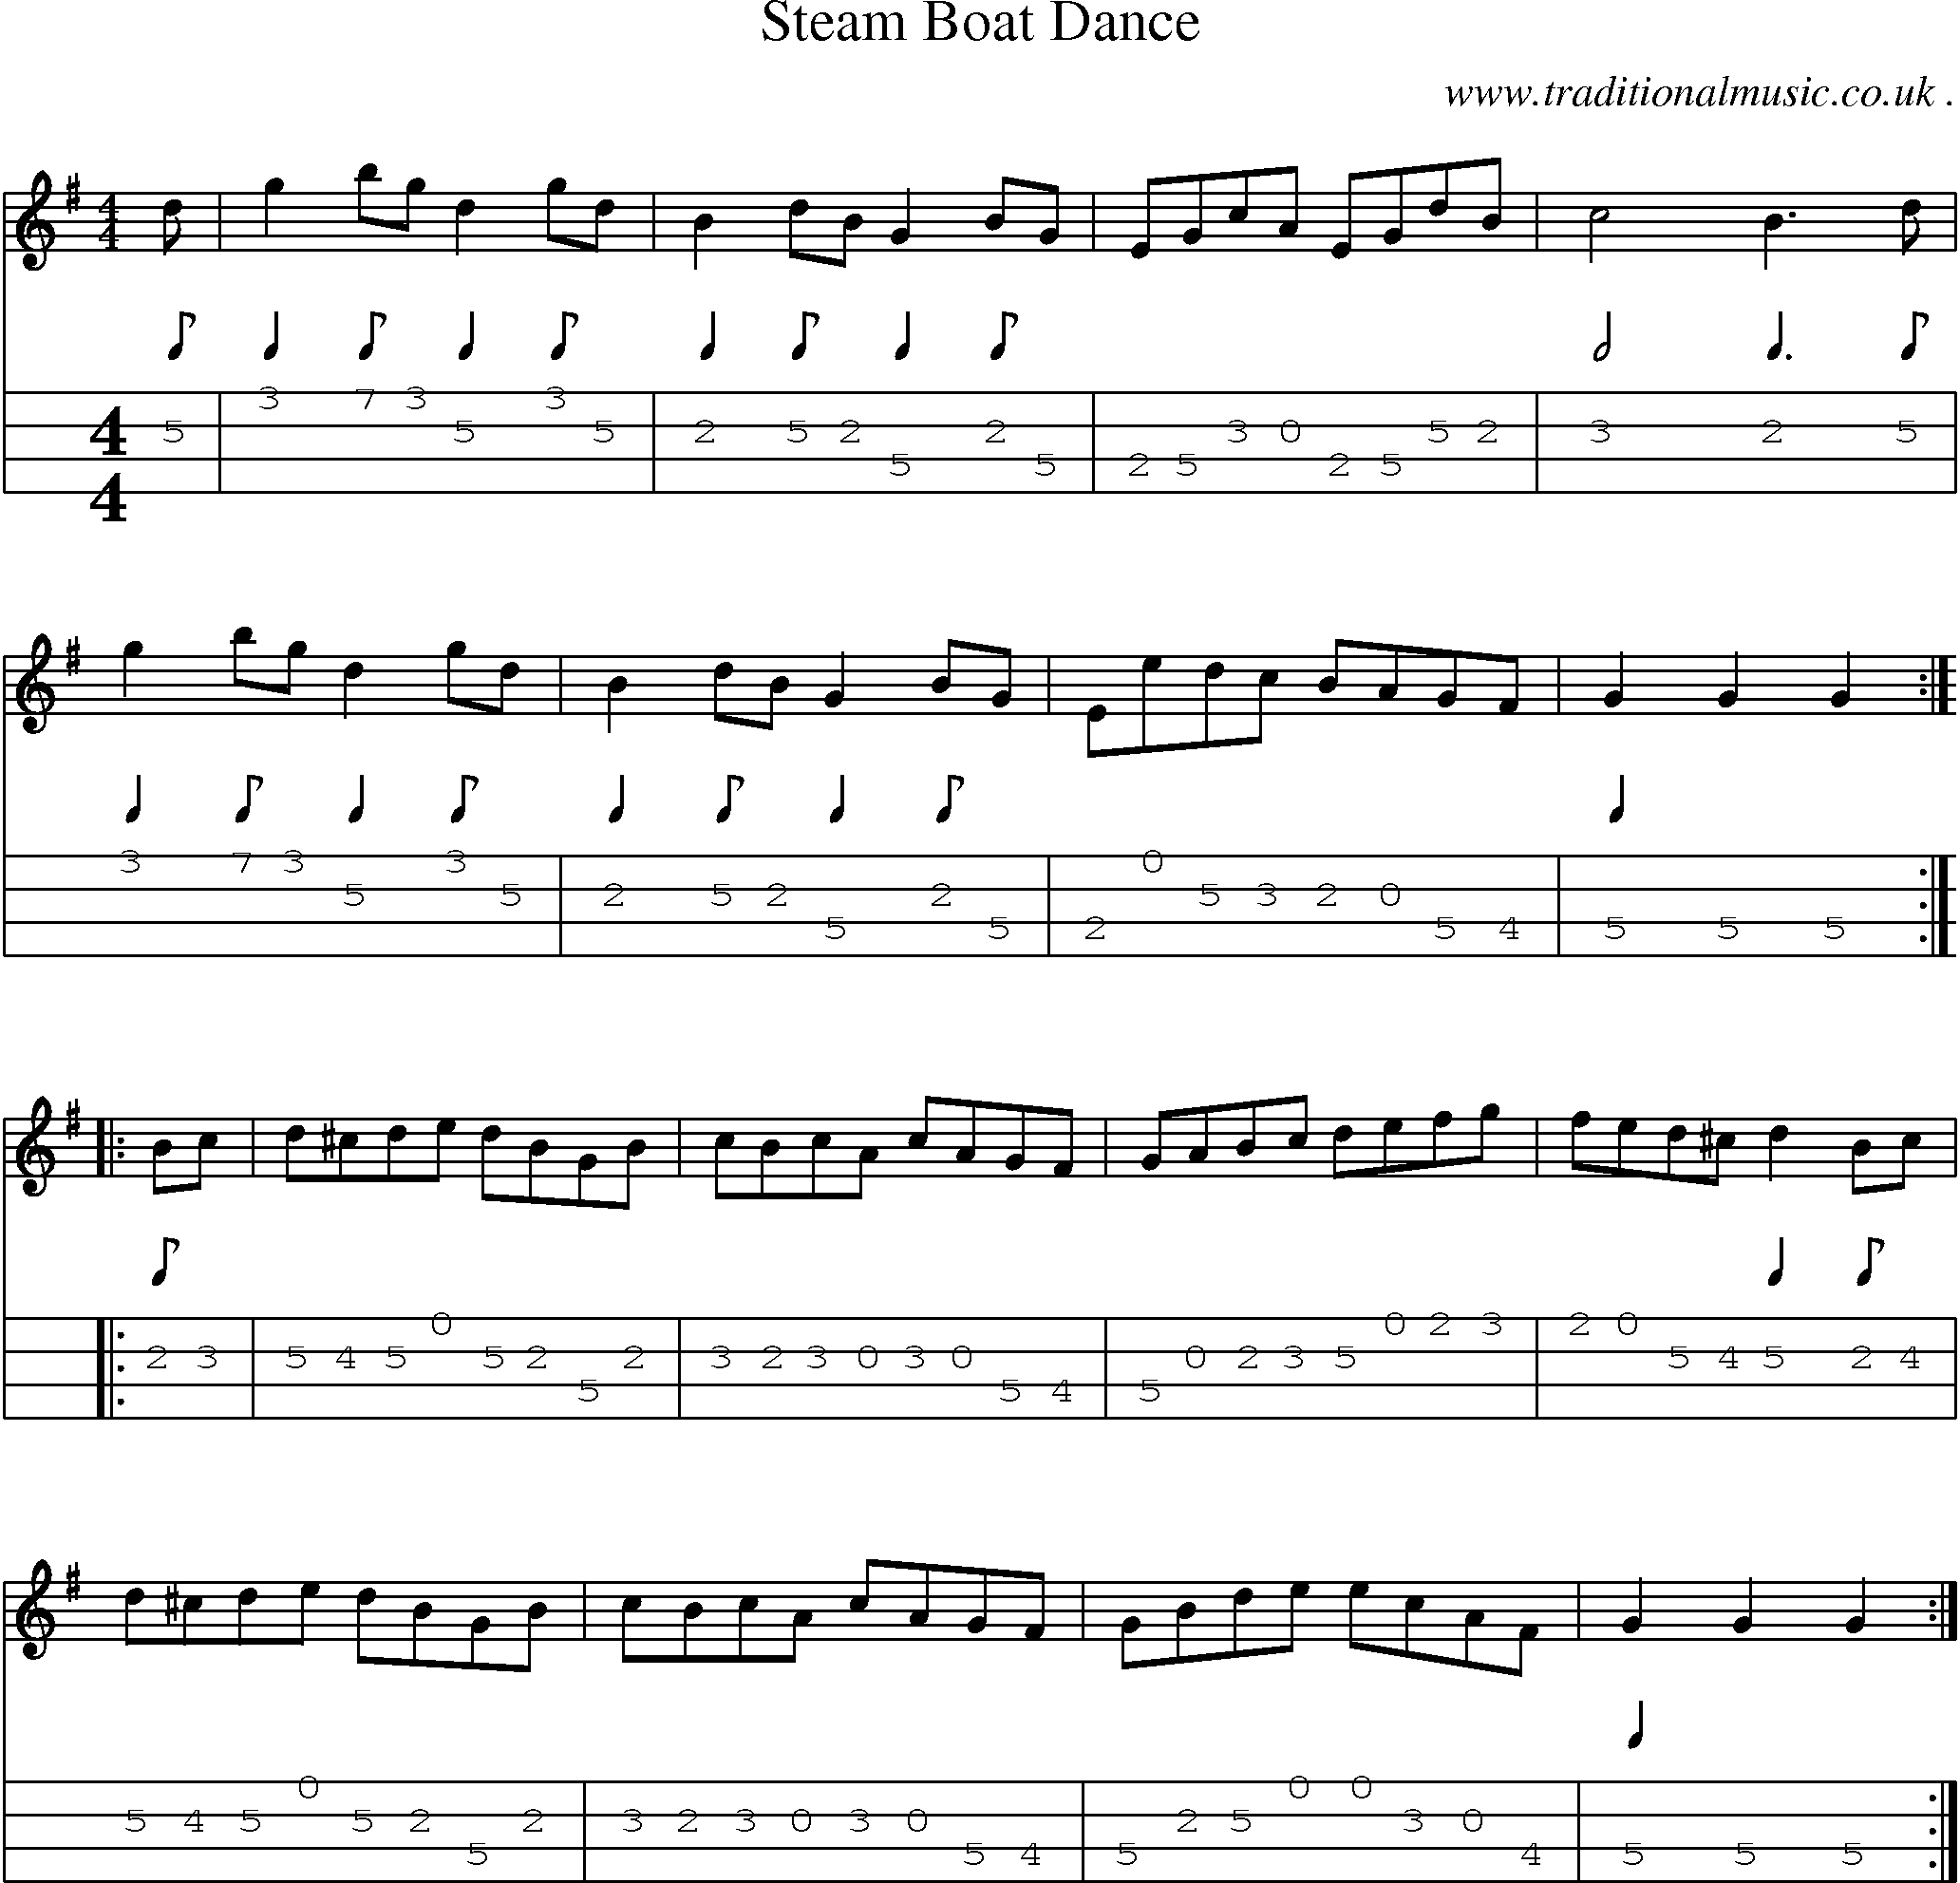 Sheet-Music and Mandolin Tabs for Steam Boat Dance